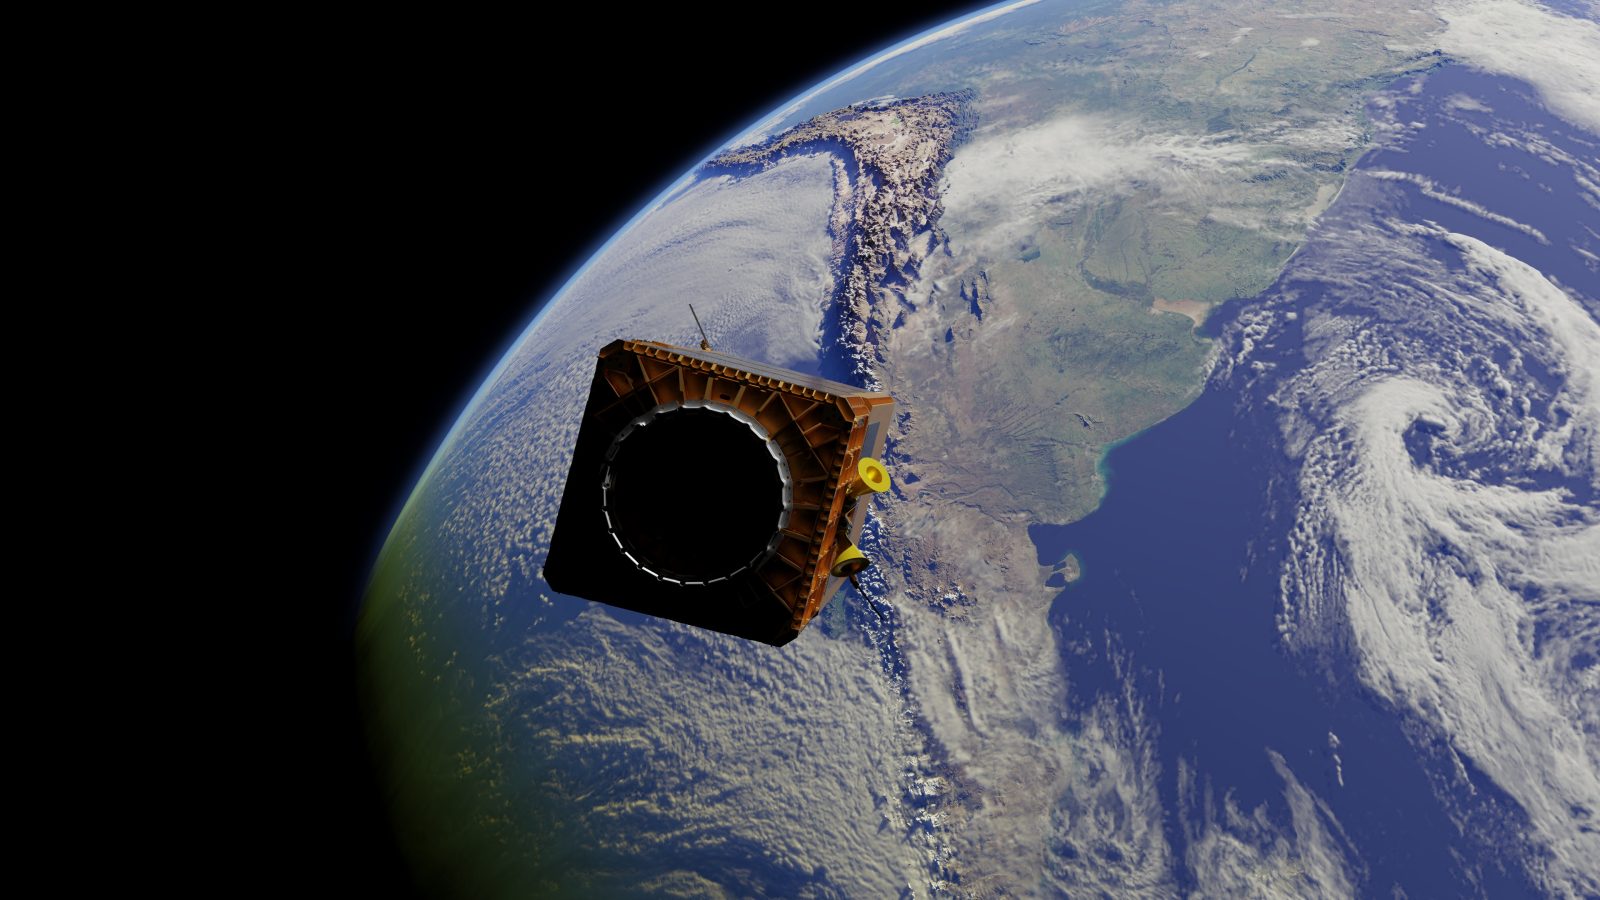 Computer rendering of an OSK satellite, which monitors methane emissions on Earth. (Courtesy of Orbital Sidekick)